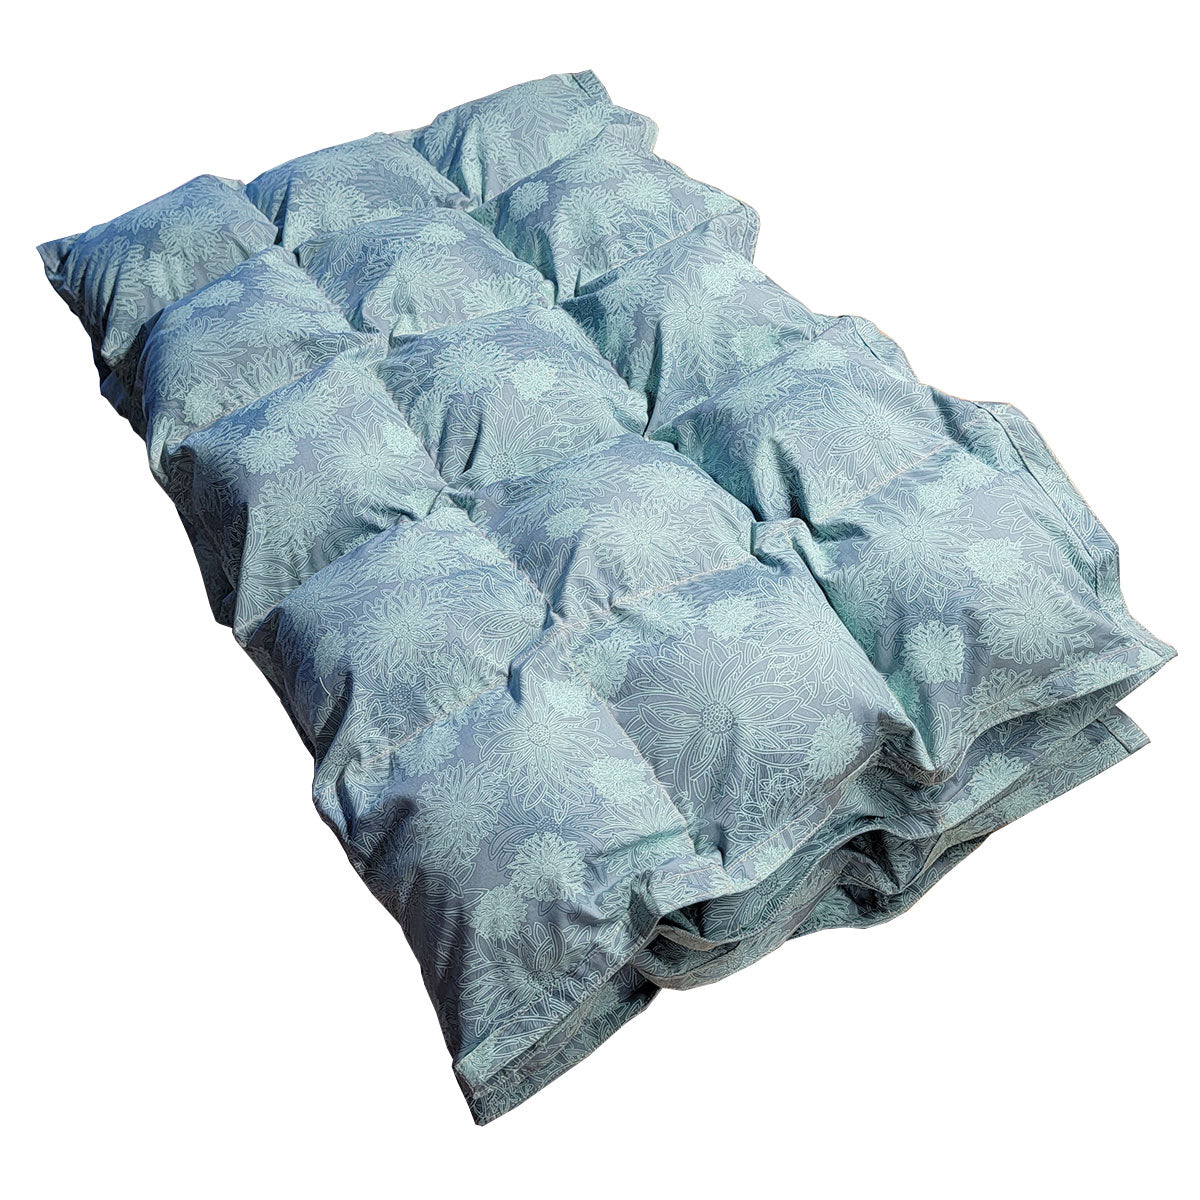 Clearance Weighted Blanket - Medium 12 lb Floral Dusty Blue (for 100 lb user)